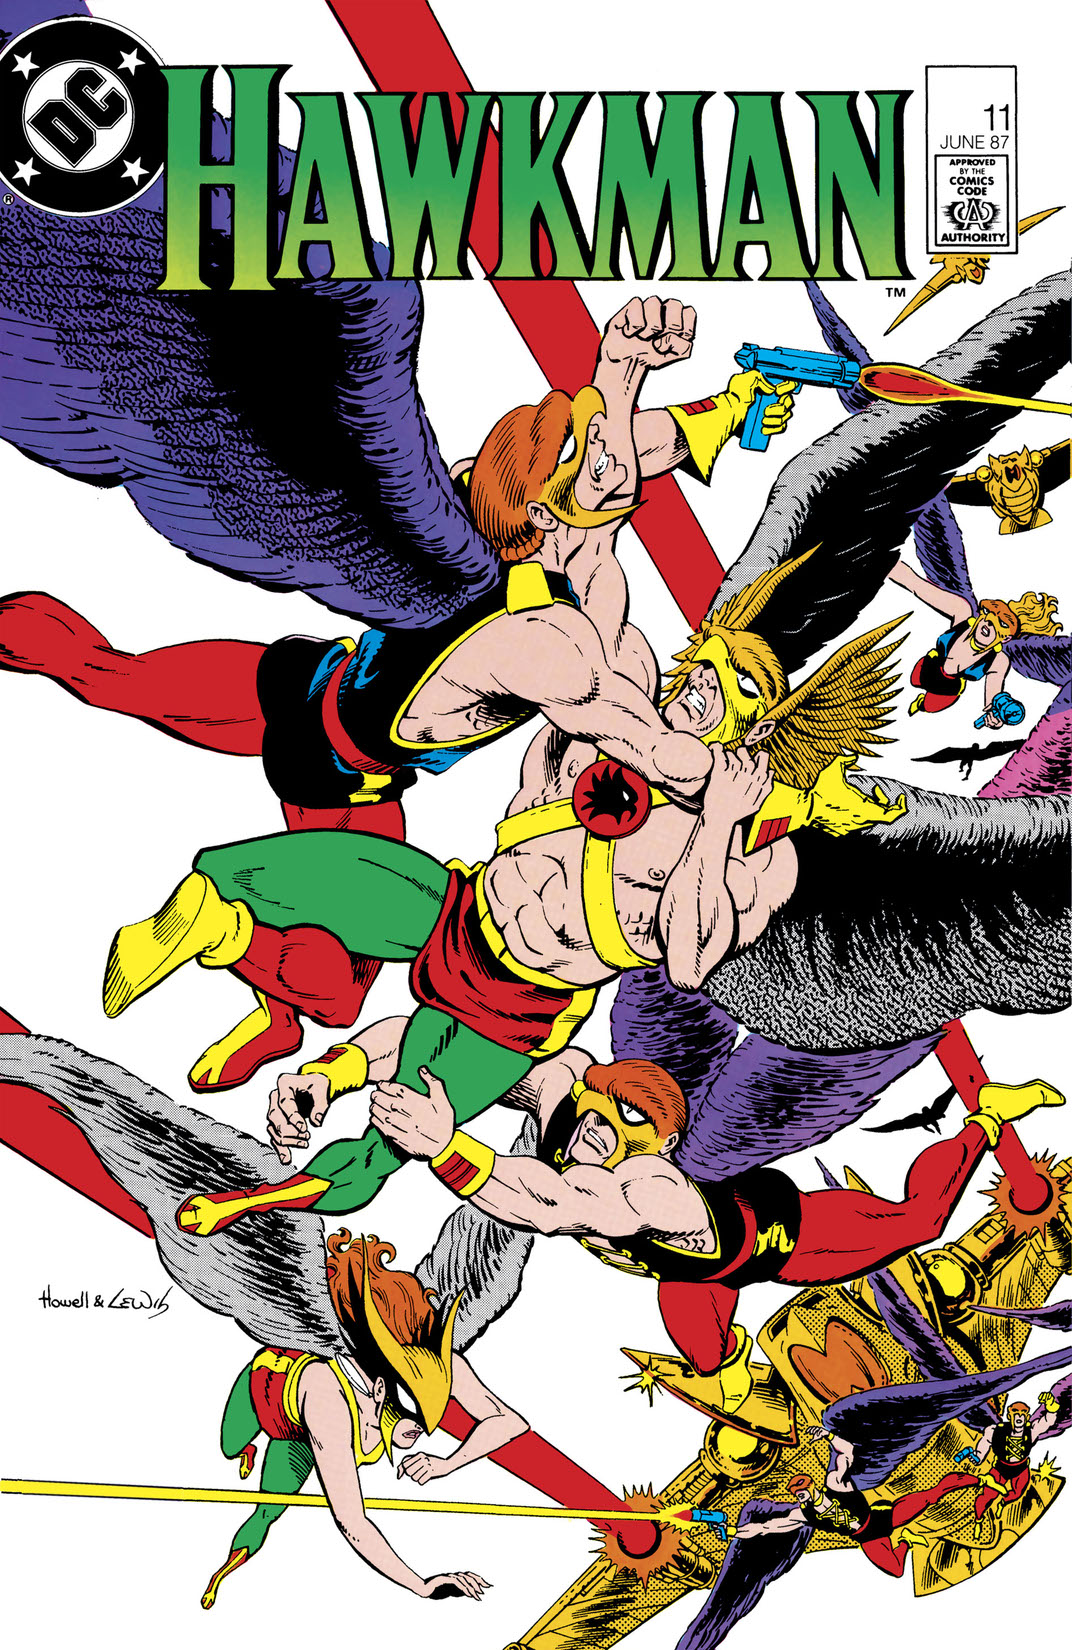 Hawkman (1986-) #11 preview images